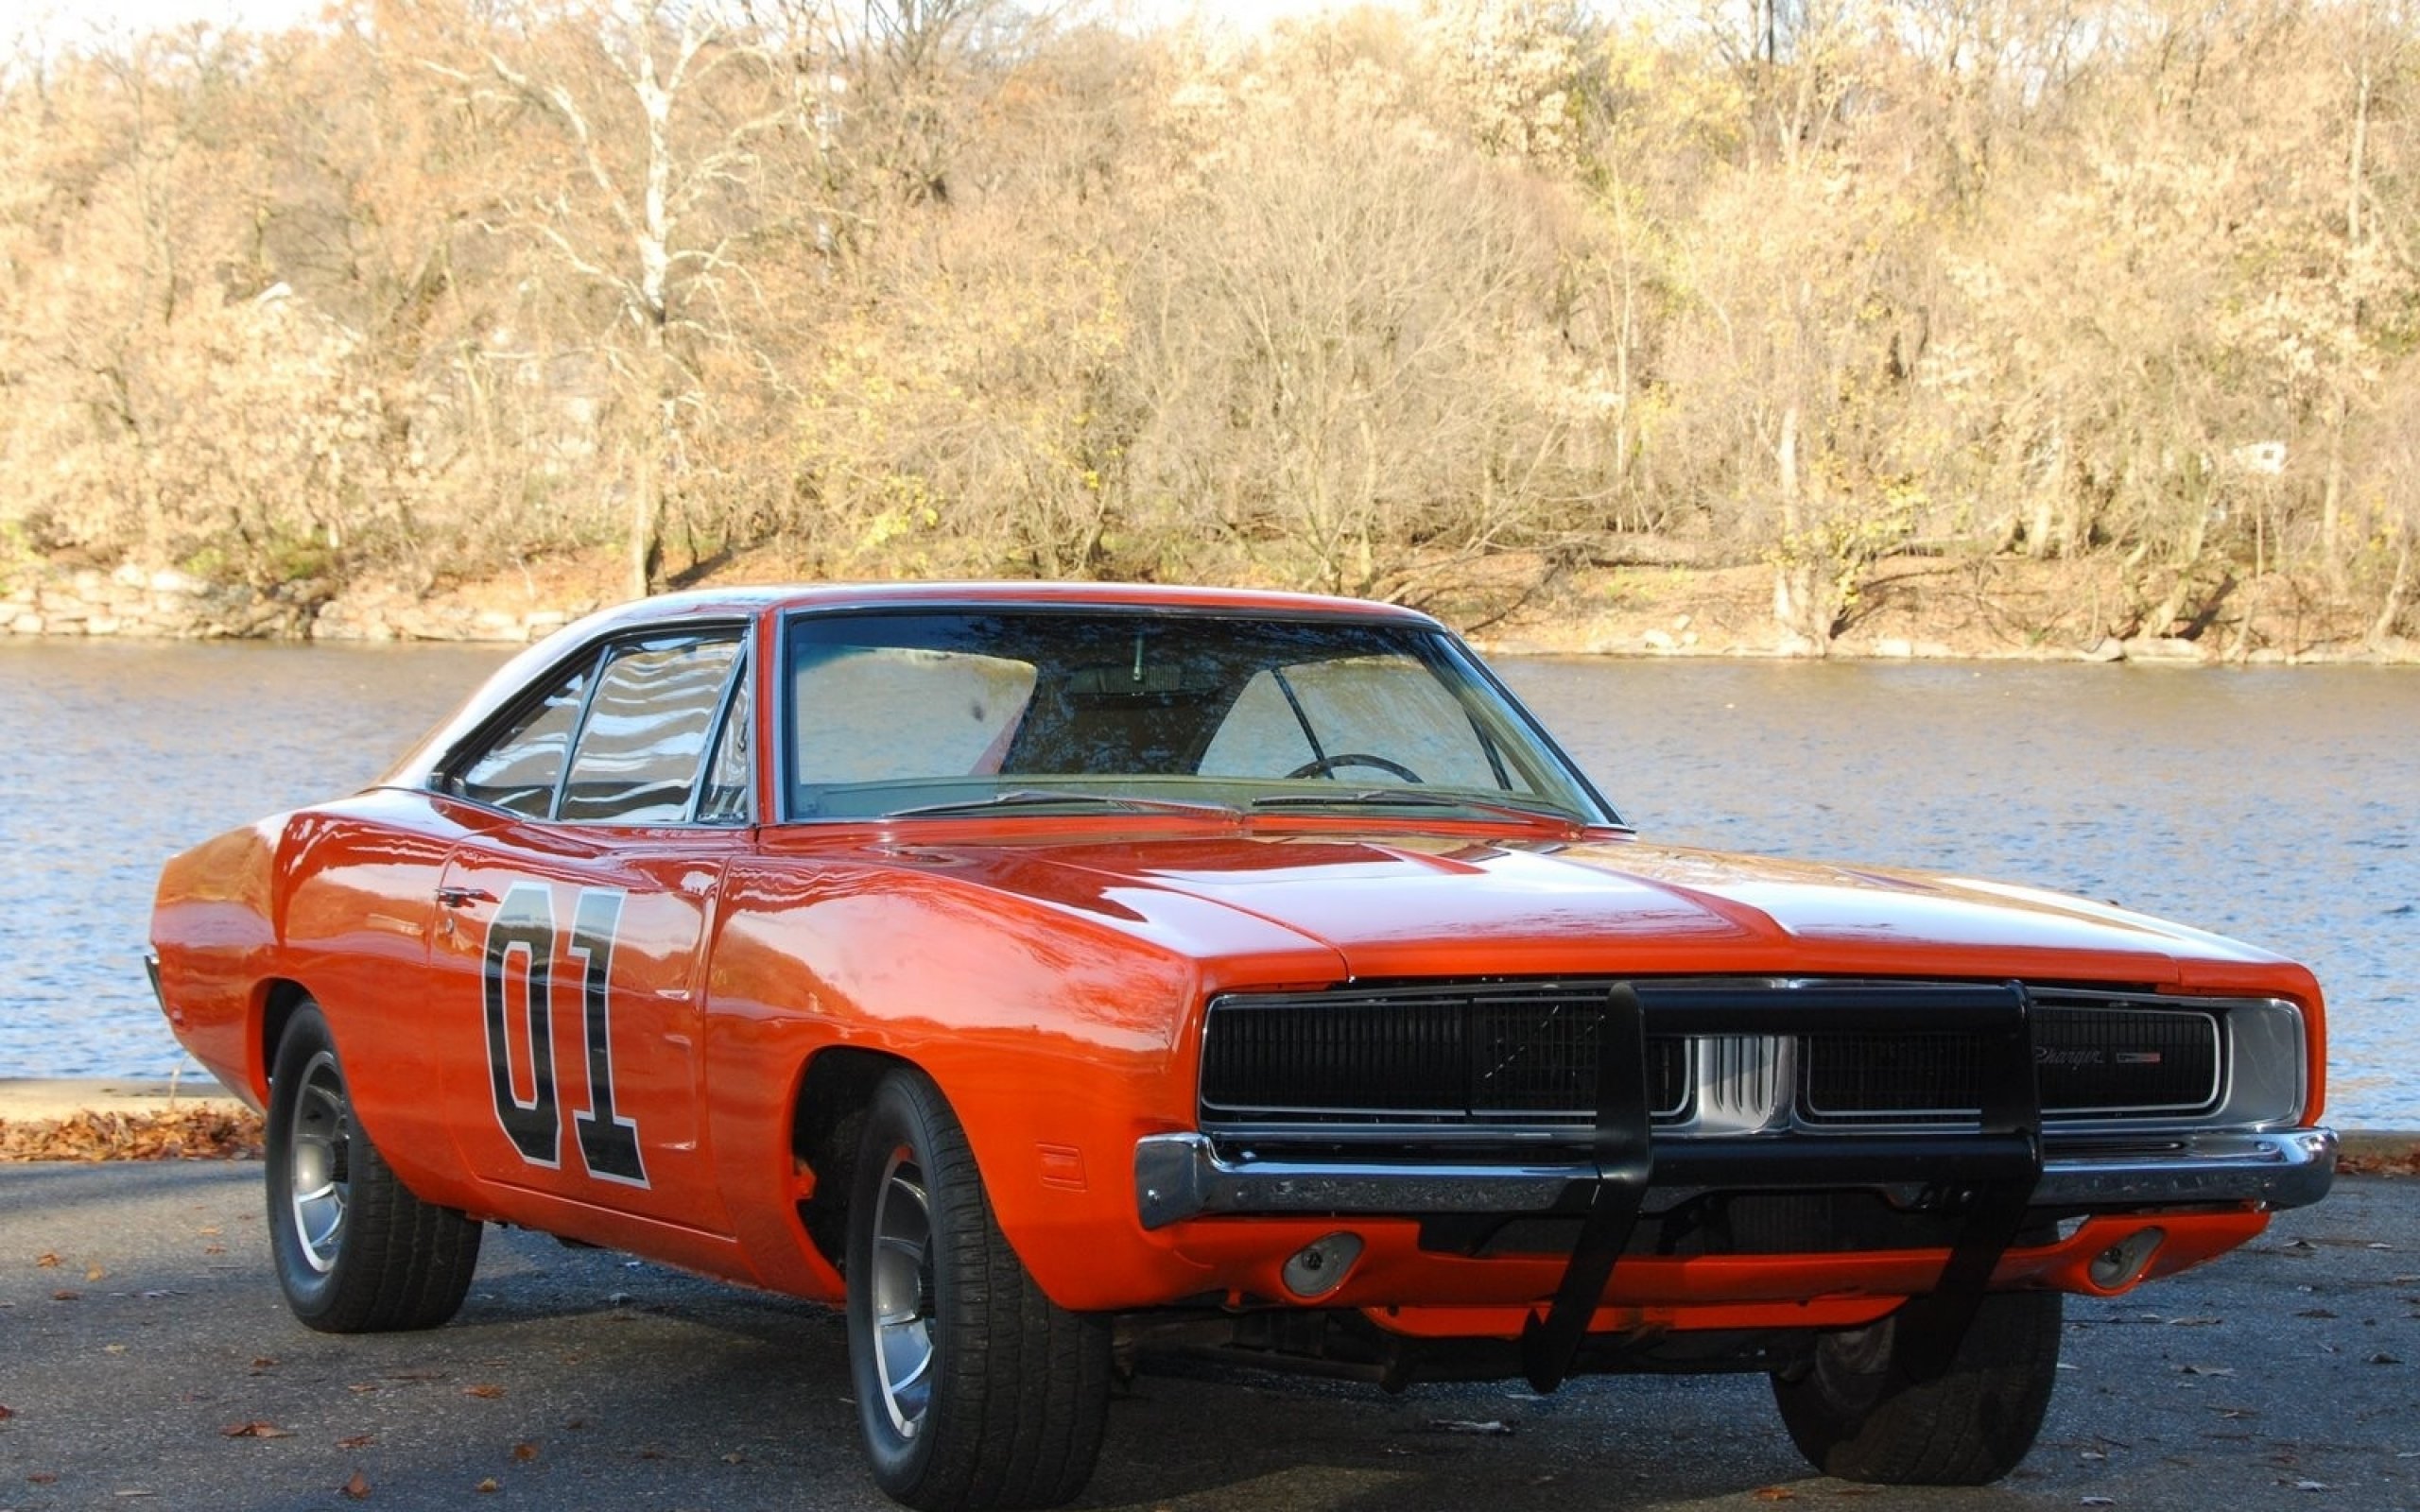 general, Lee, Dukes, Hazzard, Dodge, Charger, Muscle, Hot, Rod, Rods, Television, Series Wallpaper